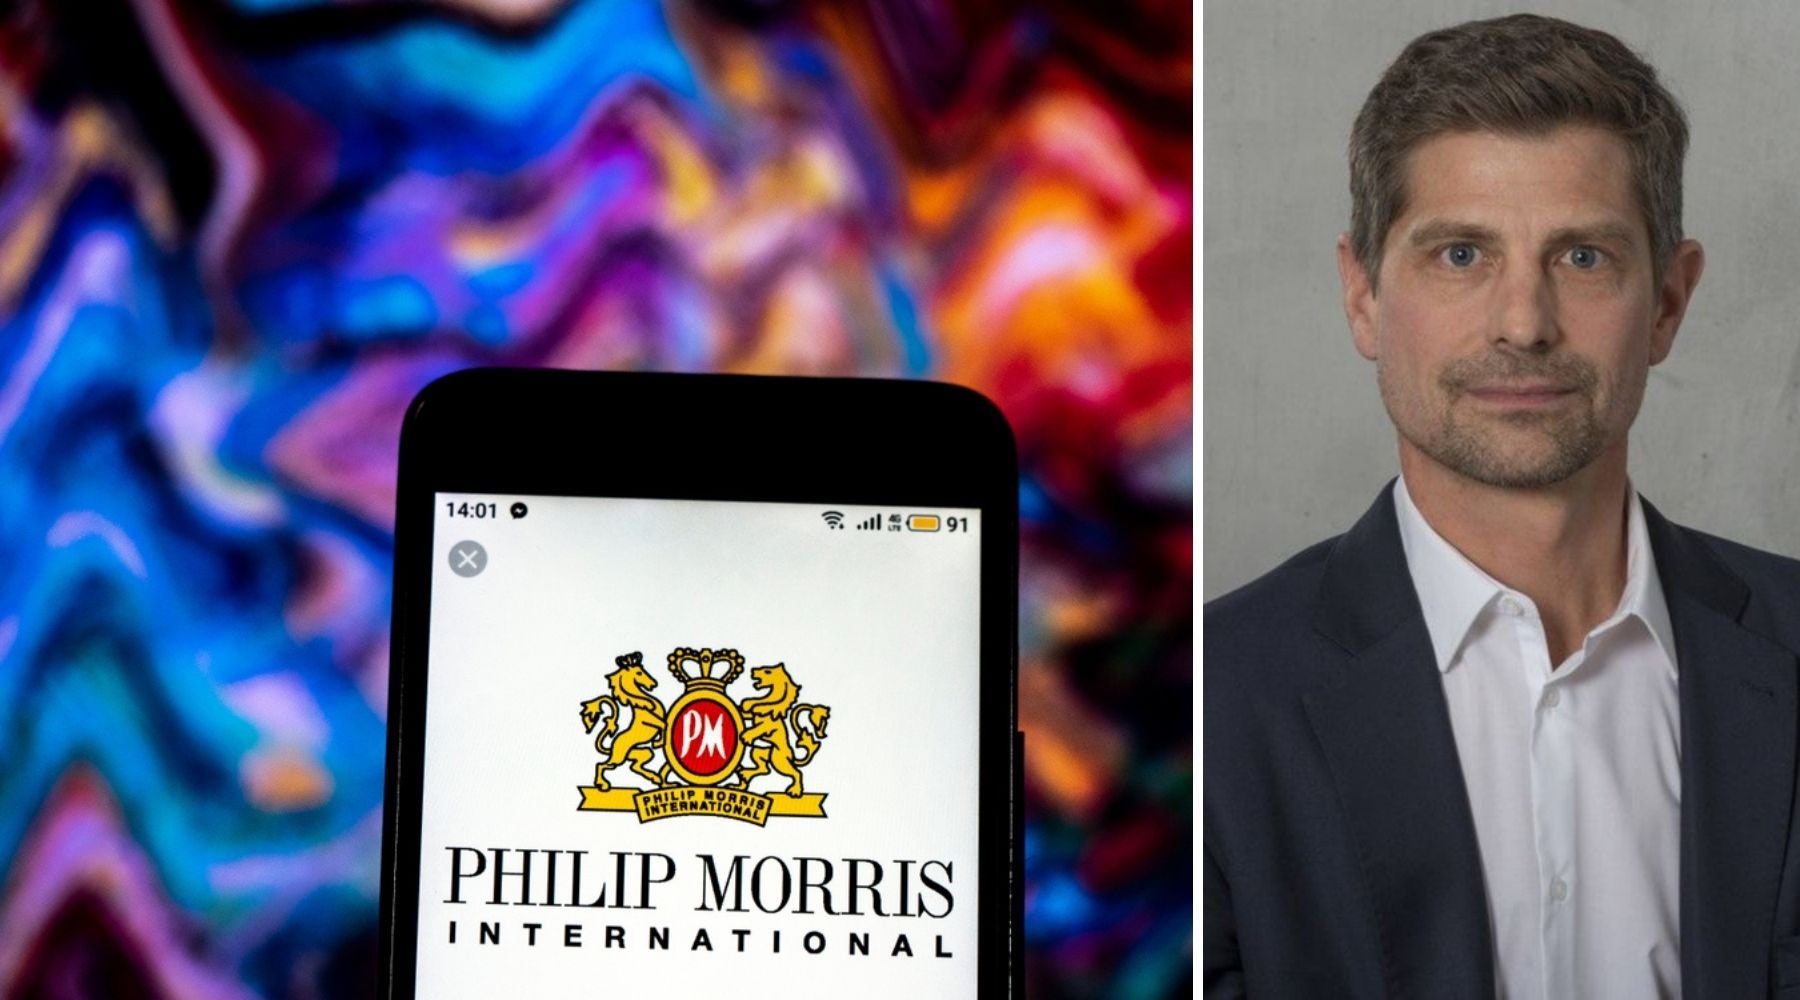 Philip Morris CTO Michael Voegele self-disrupting with technology and data